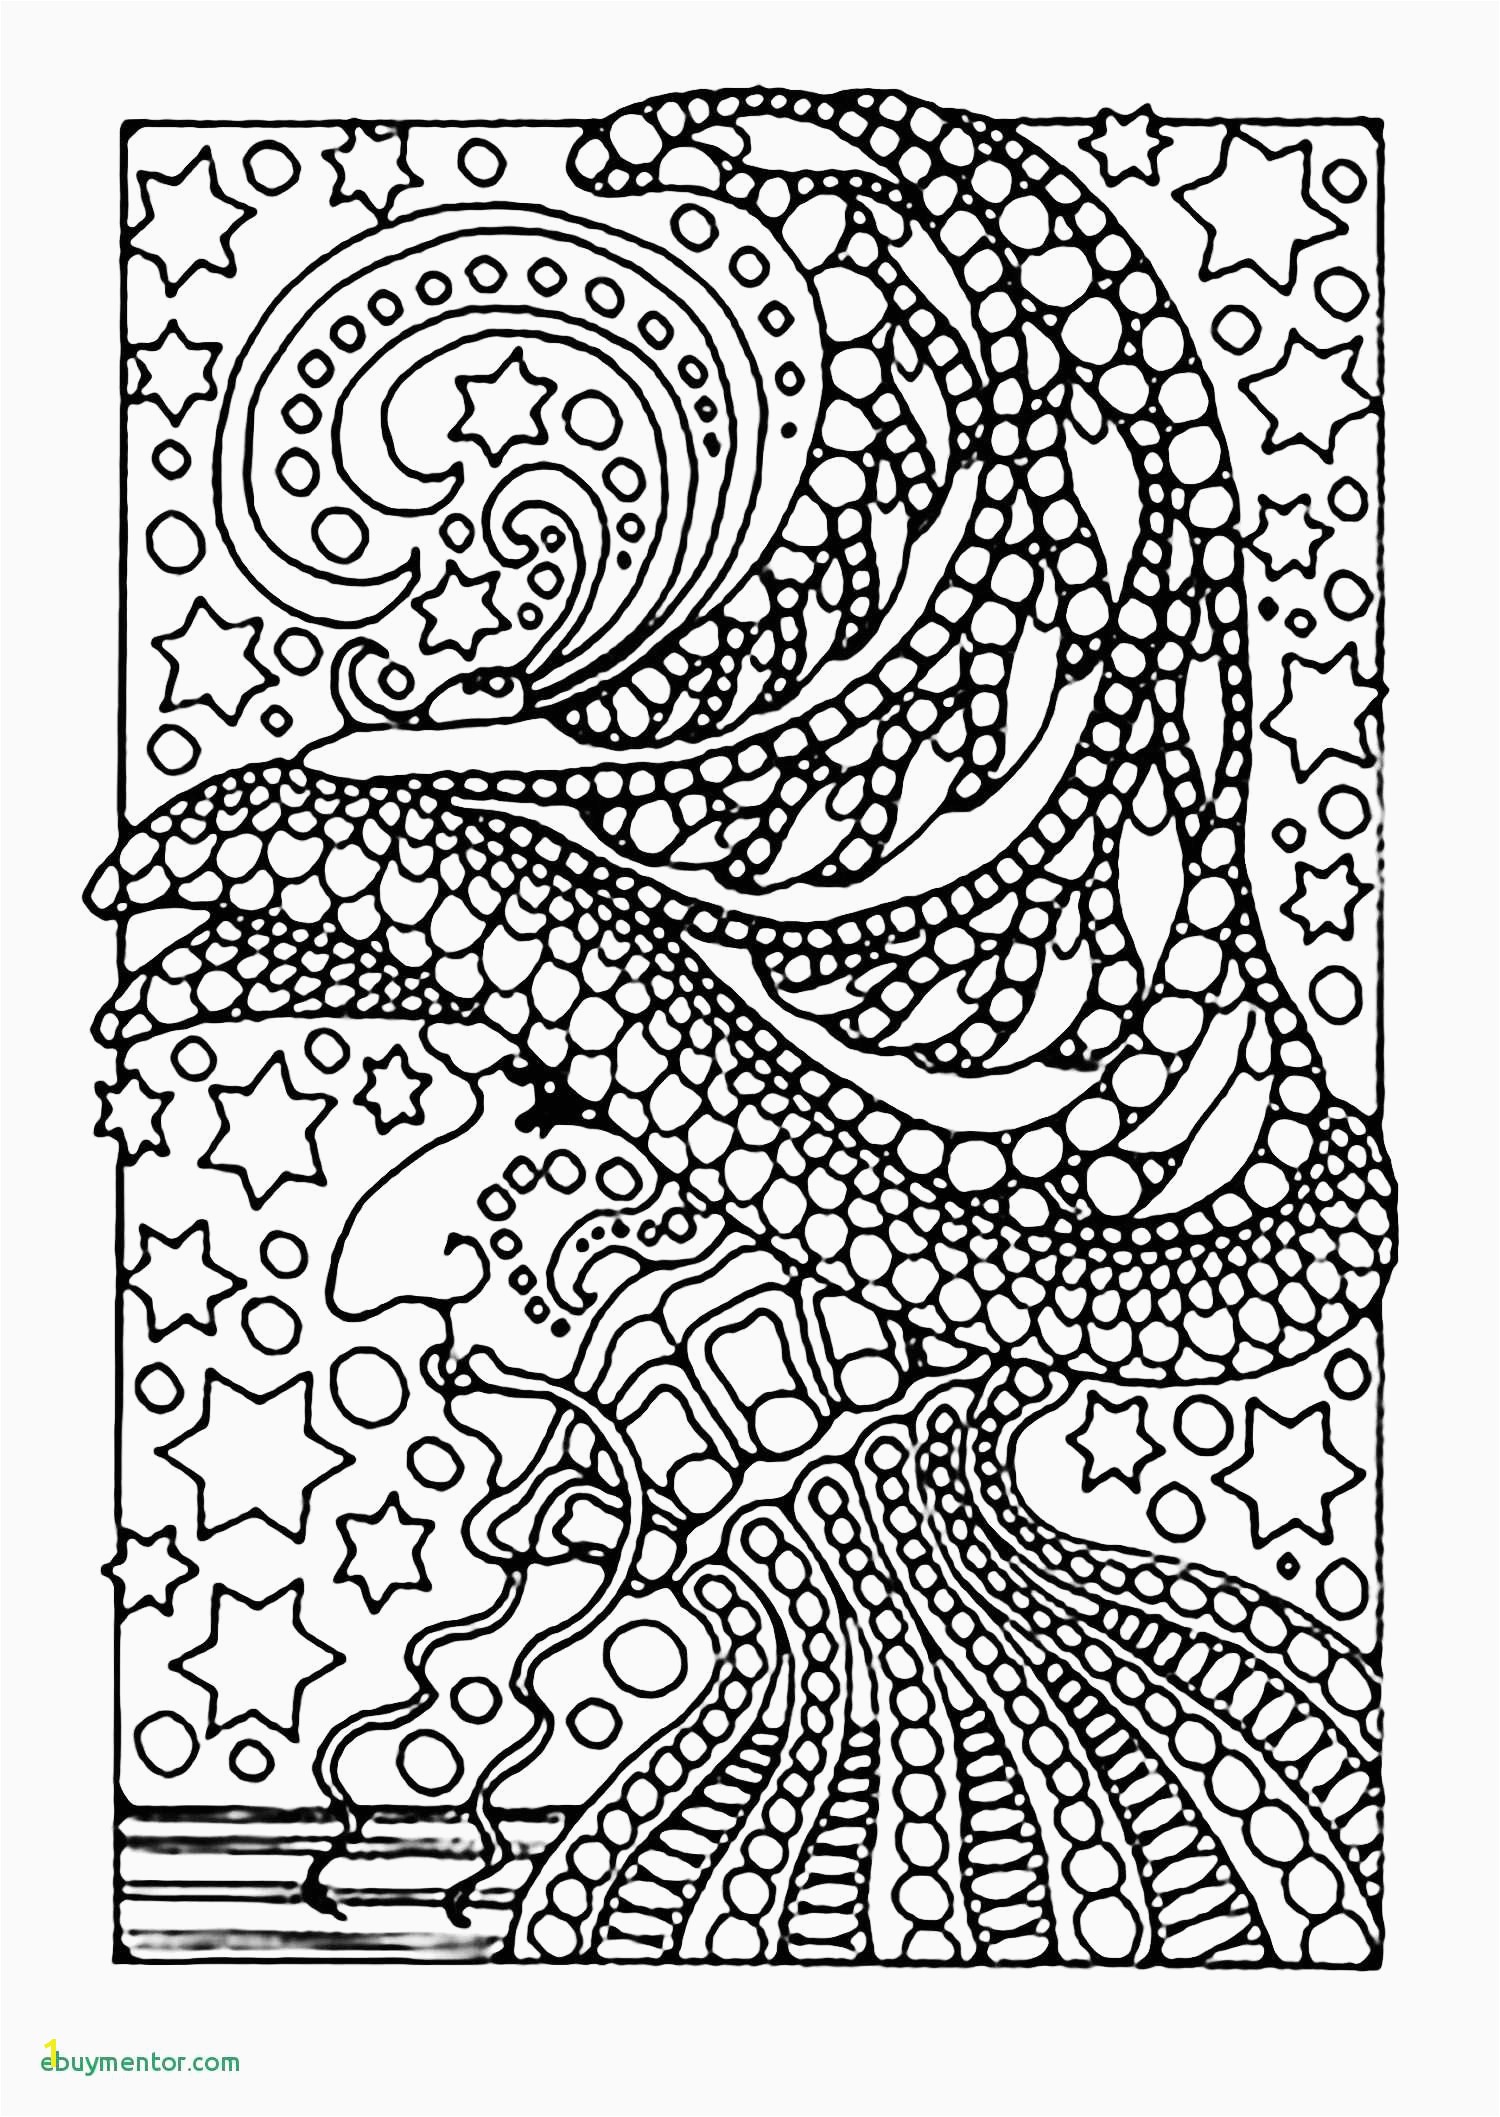 Ornament Coloring Pages Printable Christmas ornaments Coloring Pages Cool Coloring Page